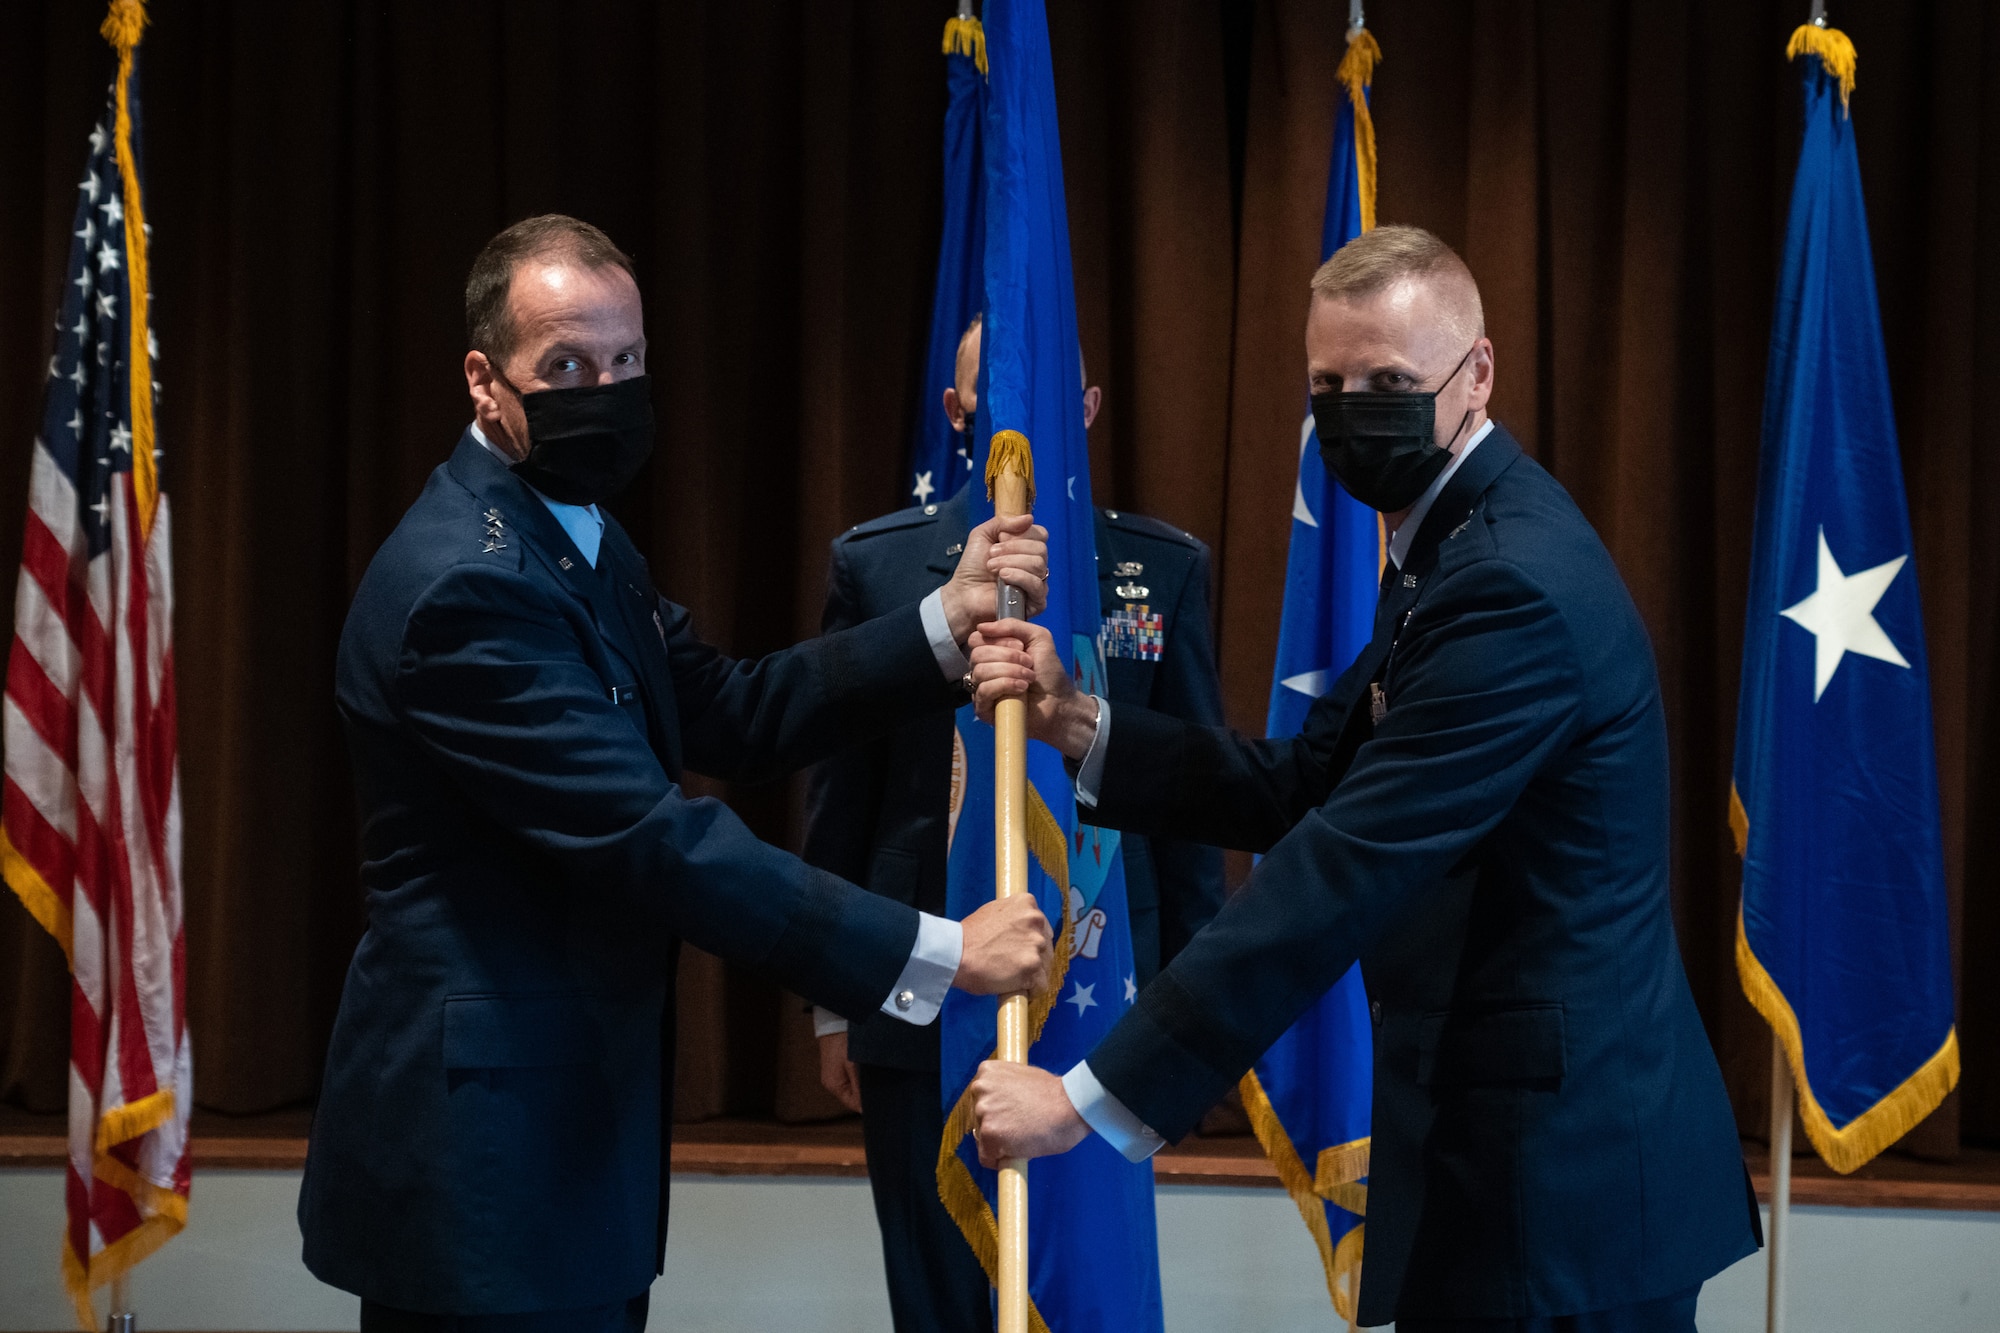 Lt. Gen. Shaun Q. Morris, Air Force Life Cycle Management Center commander, presents the guidon to Brig. Gen. Luke Cropsey, Air Force Security Assistance and Cooperation Directorate Director, during the AFSAC Change of Leadership Ceremony at the Wright-Patterson Club, August 13, 2021. The ceremony is a symbol of leadership being exchanged from one director to the next. Cropsey assumed leadership of AFSAC from Brig. Gen. Brian Bruckbauer. (U.S. Air Force photo by Tech. Sgt. Matthew B. Fredericks)